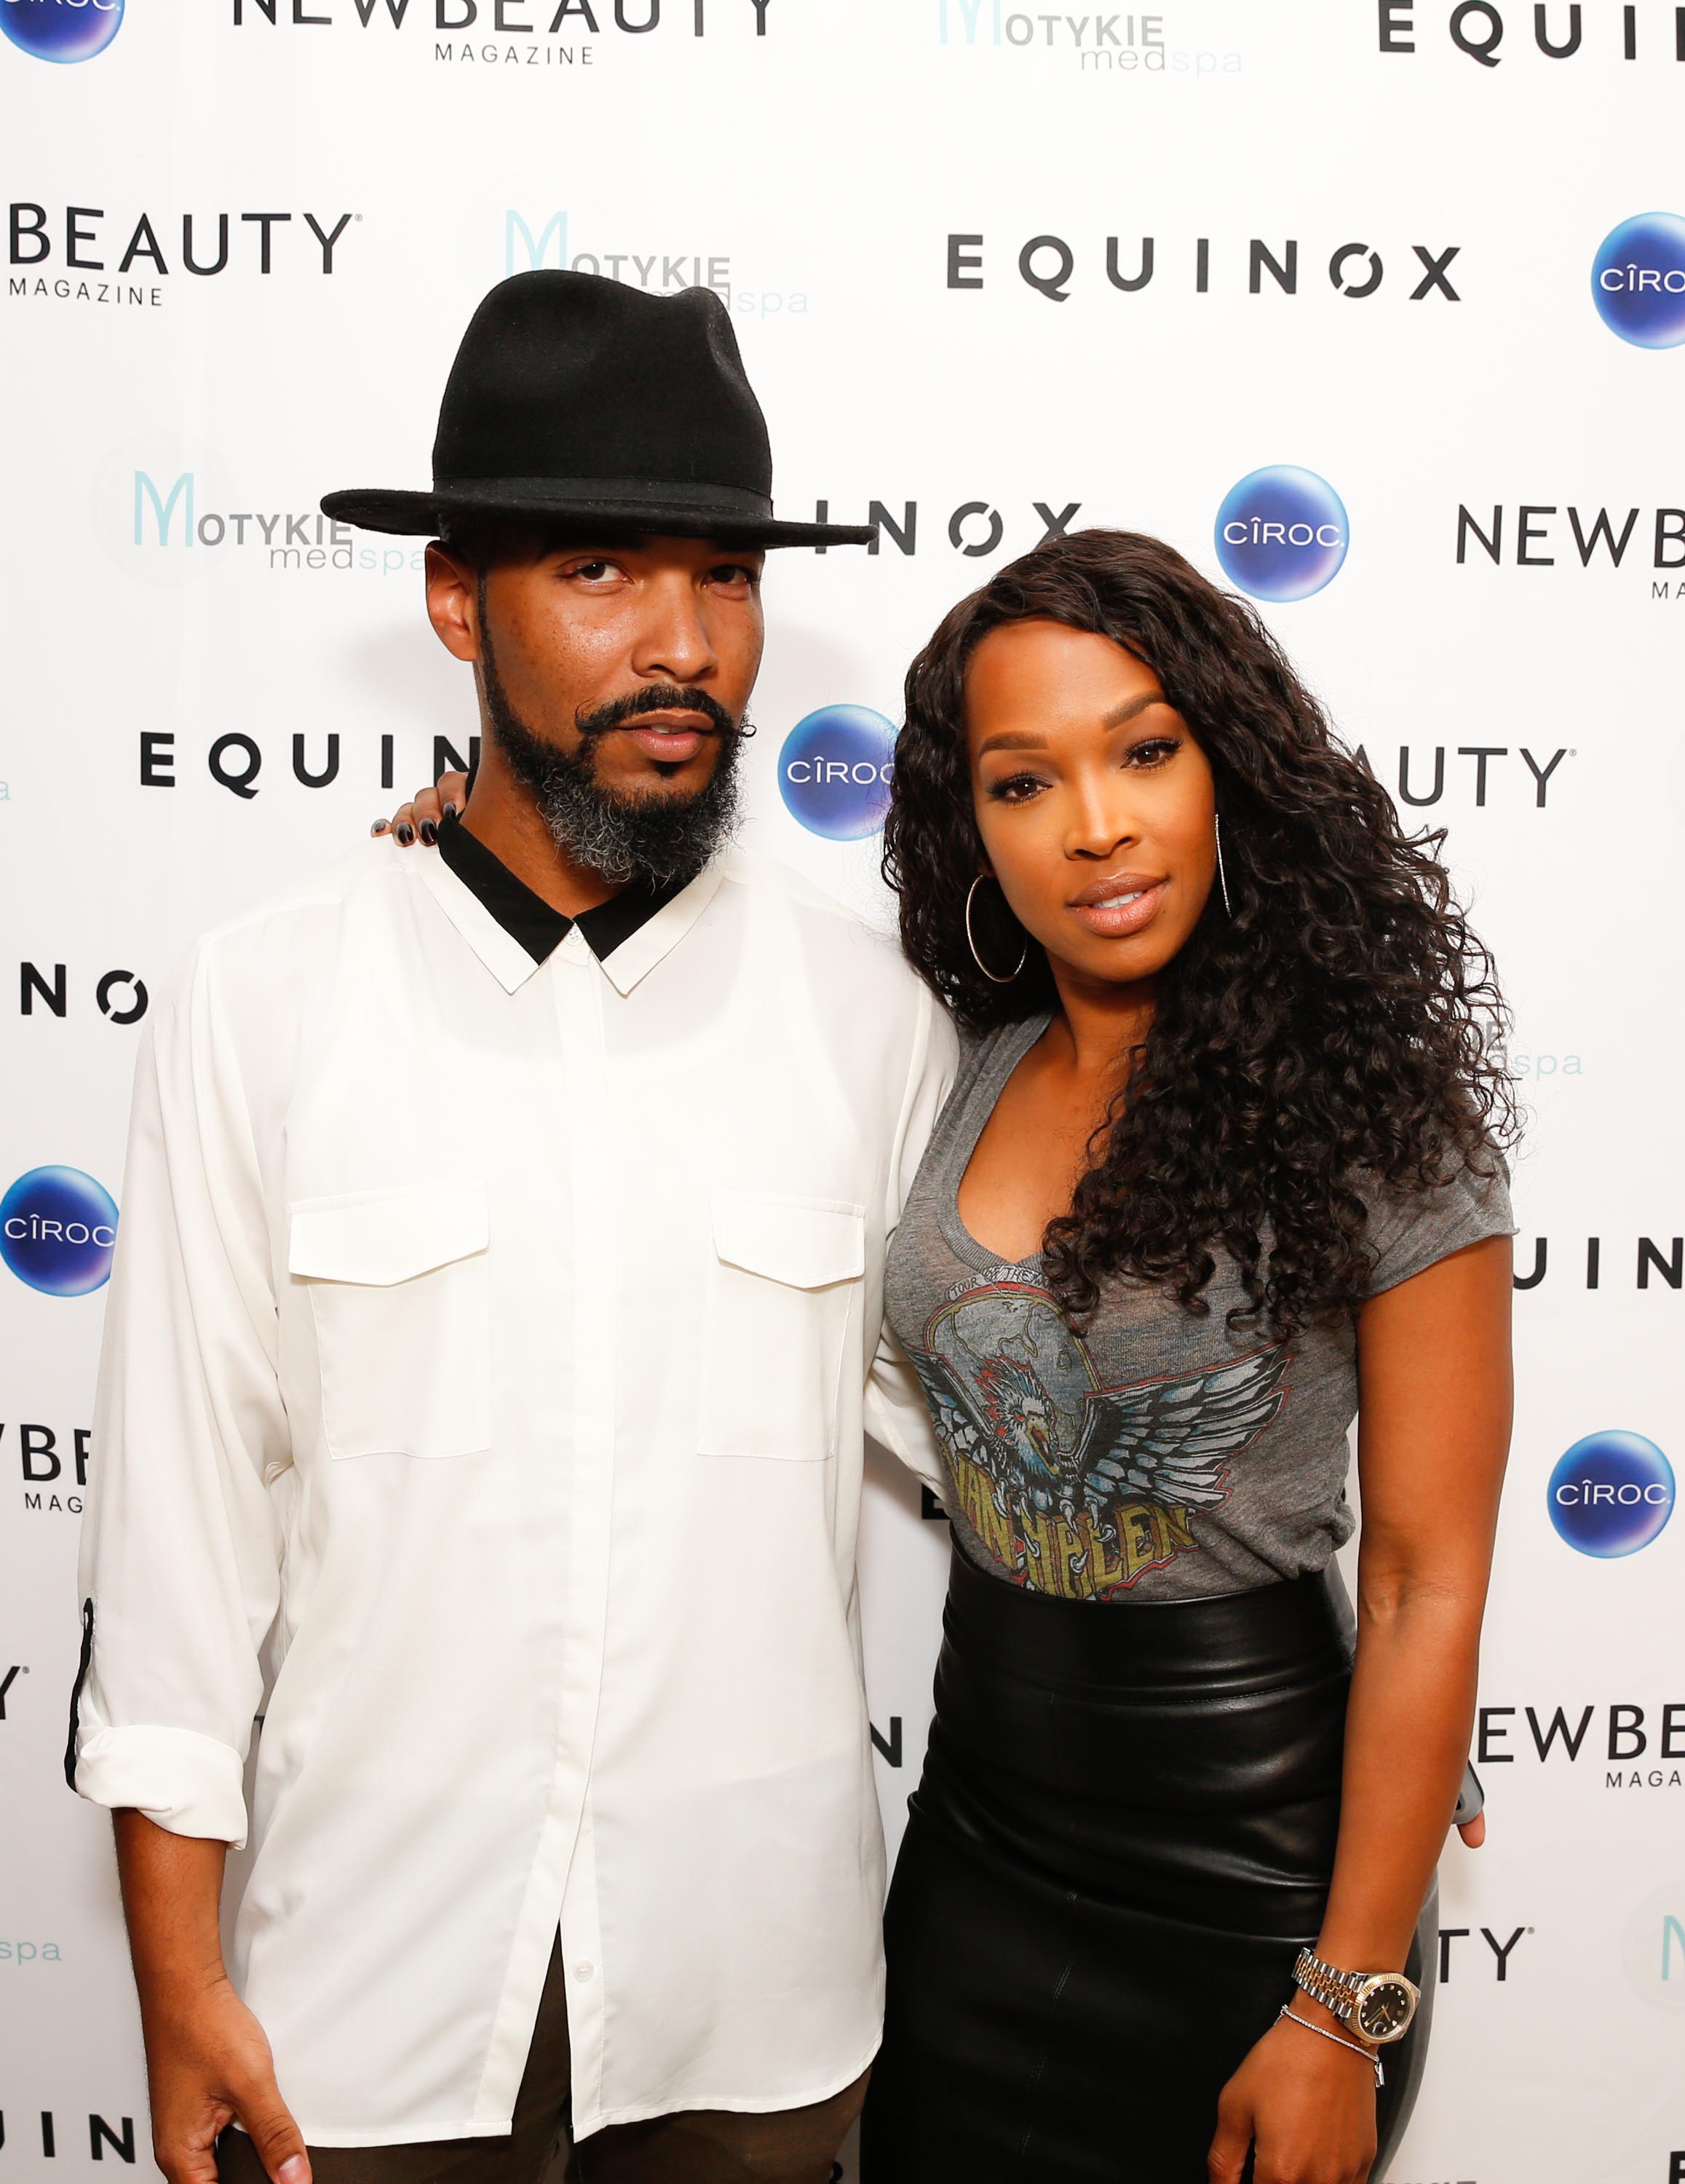 Malika Haqq arrives at the Fall Into Amazing Skin event